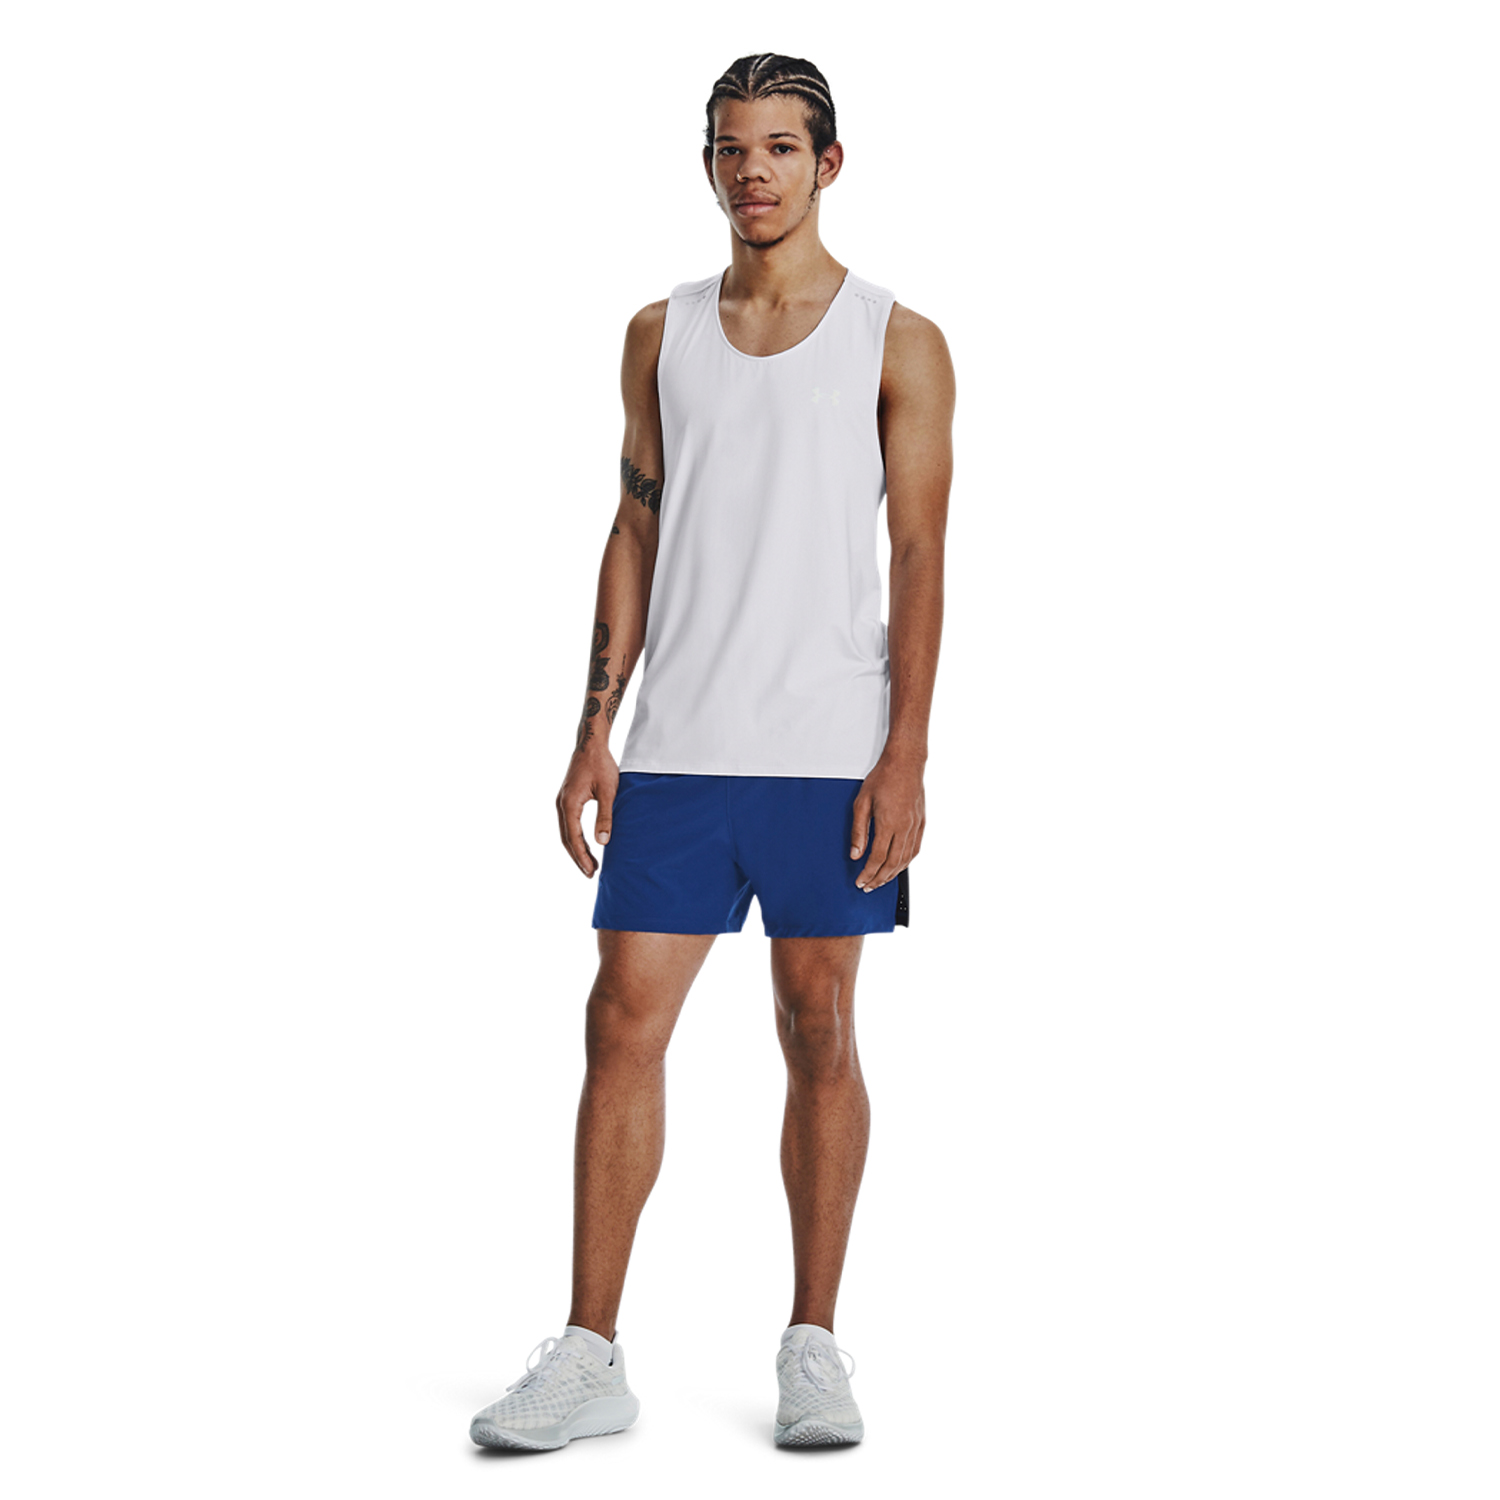 Under Armour Launch Elite 5in Shorts - Blue Mirage/Black/Reflective